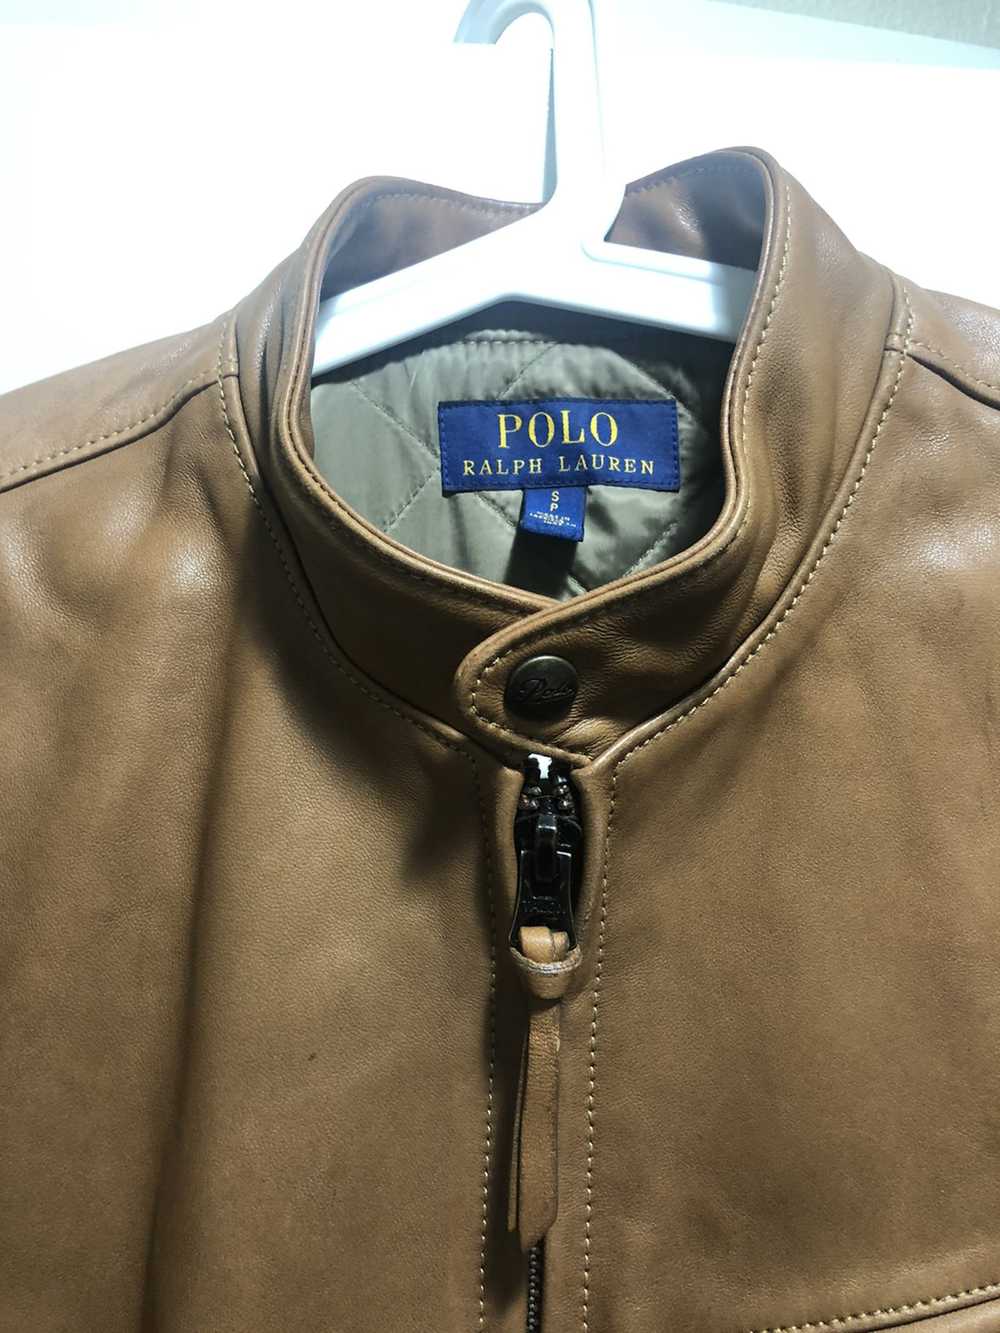 Polo Ralph Lauren 1/1 Polo Leather Jacket tailore… - image 4